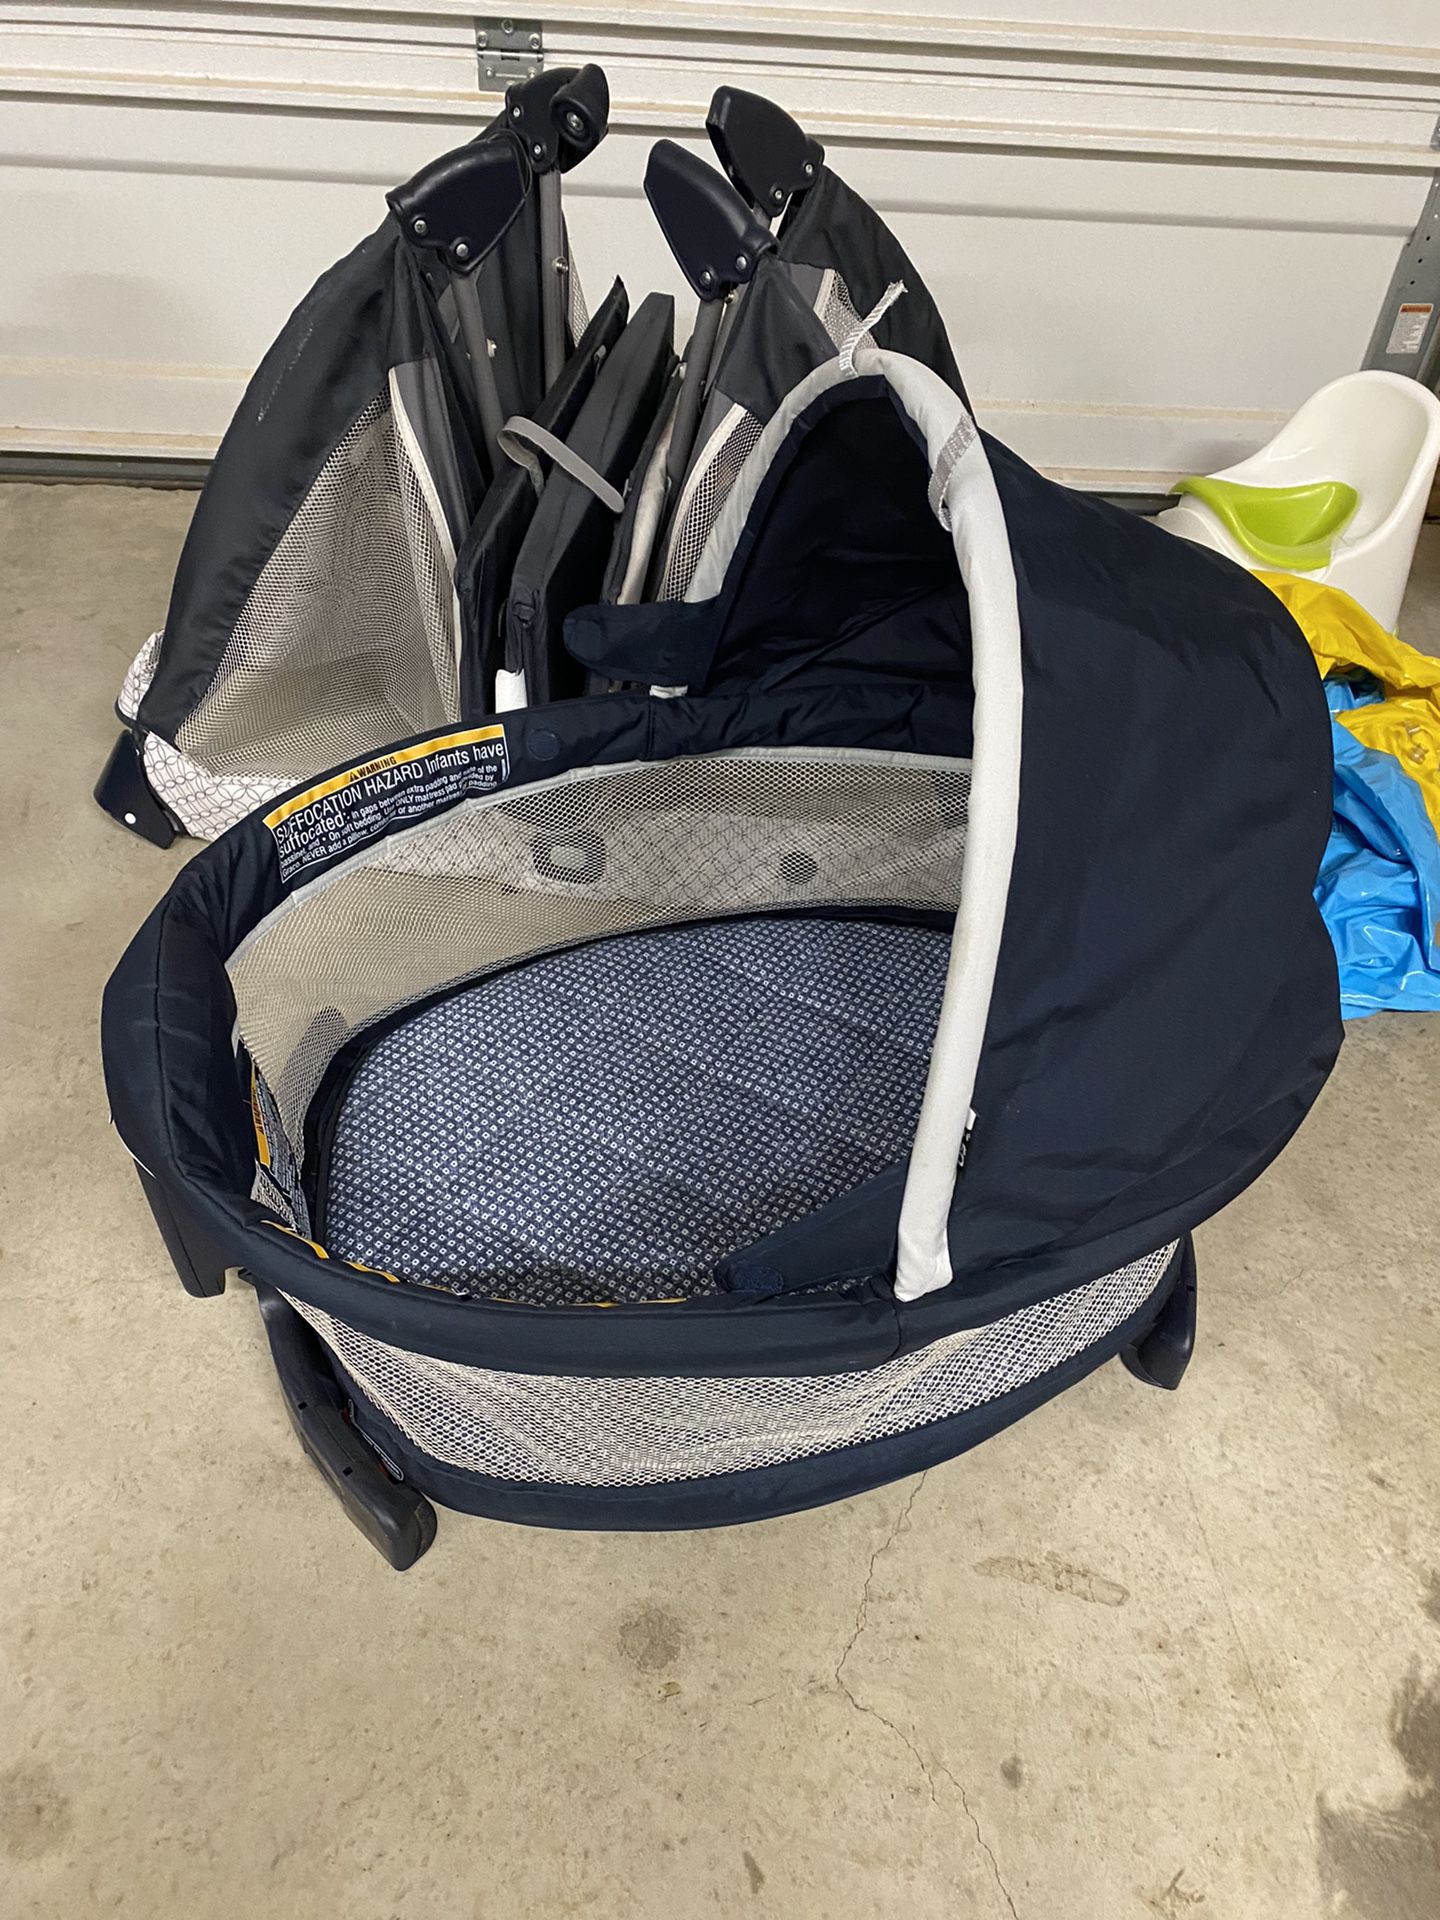 Free Baby Items (playard Size, Mini Bassinet, Spectra Pump, Baby Boy Clothes 0-3 Month’s -Must pick Up All